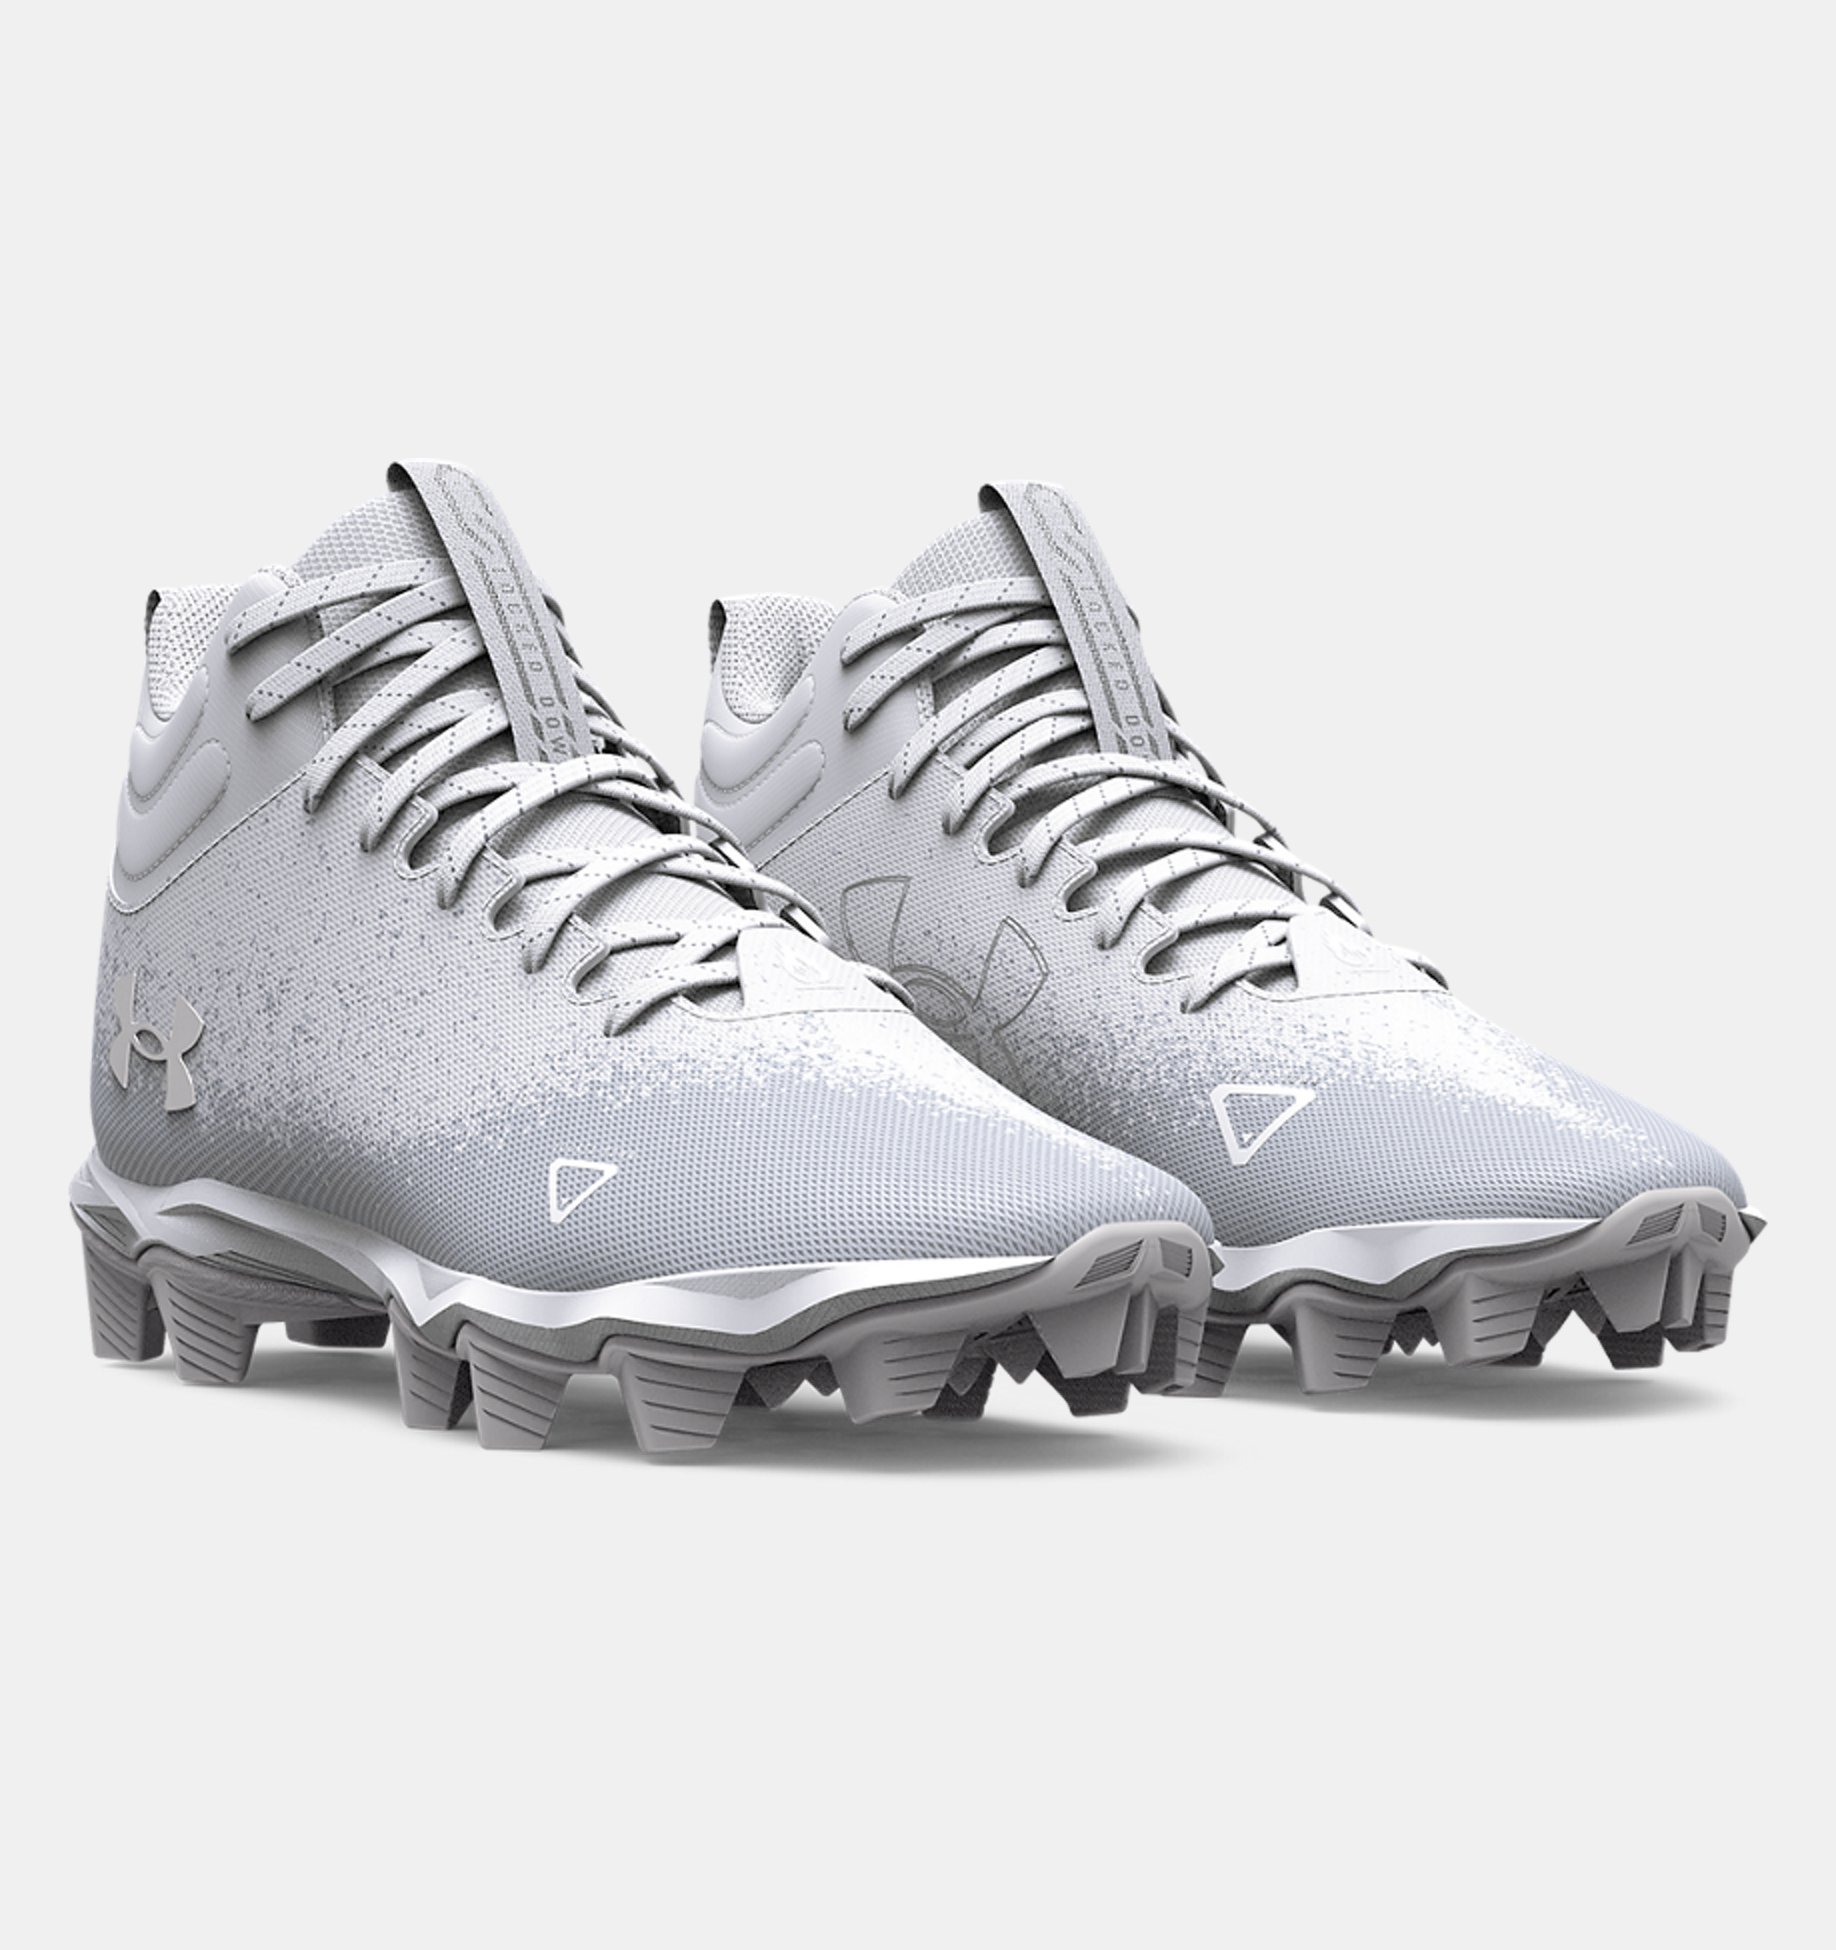 Under Armour Cleats White/Silver Used Multiple Sizes 